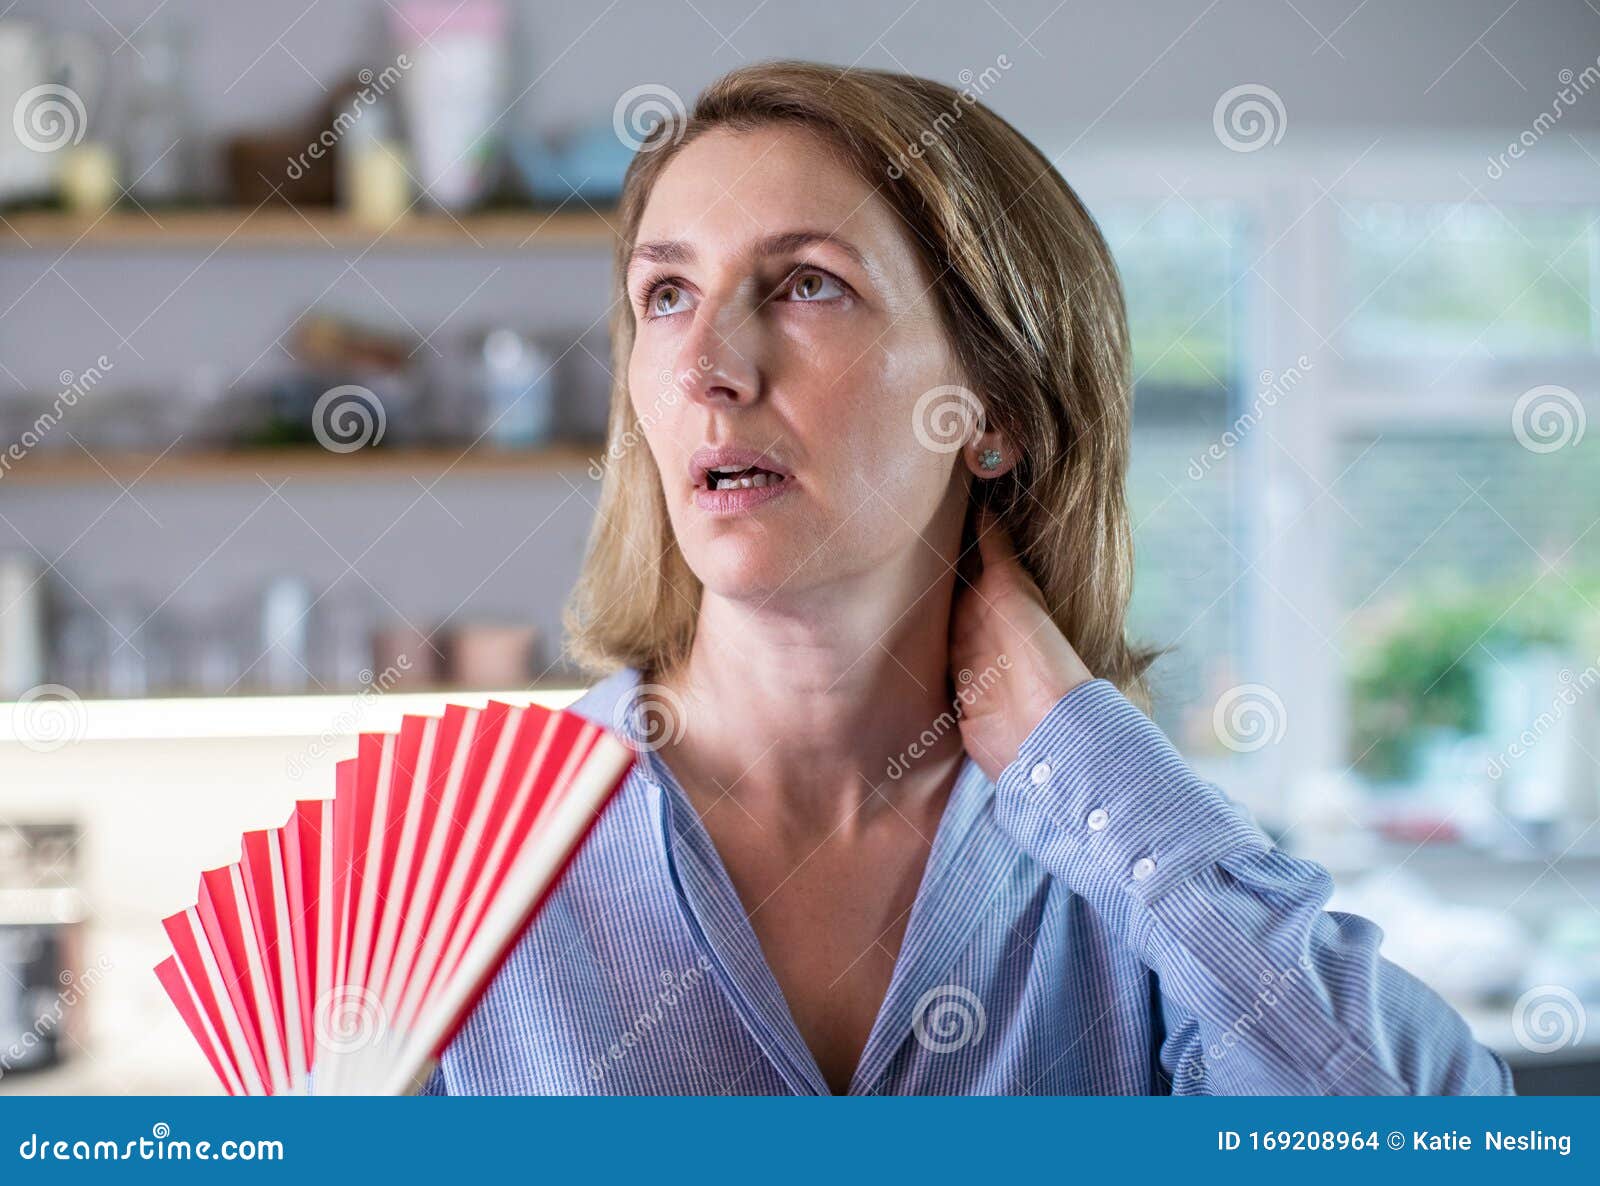 mature woman experiencing hot flush from menopause using fan